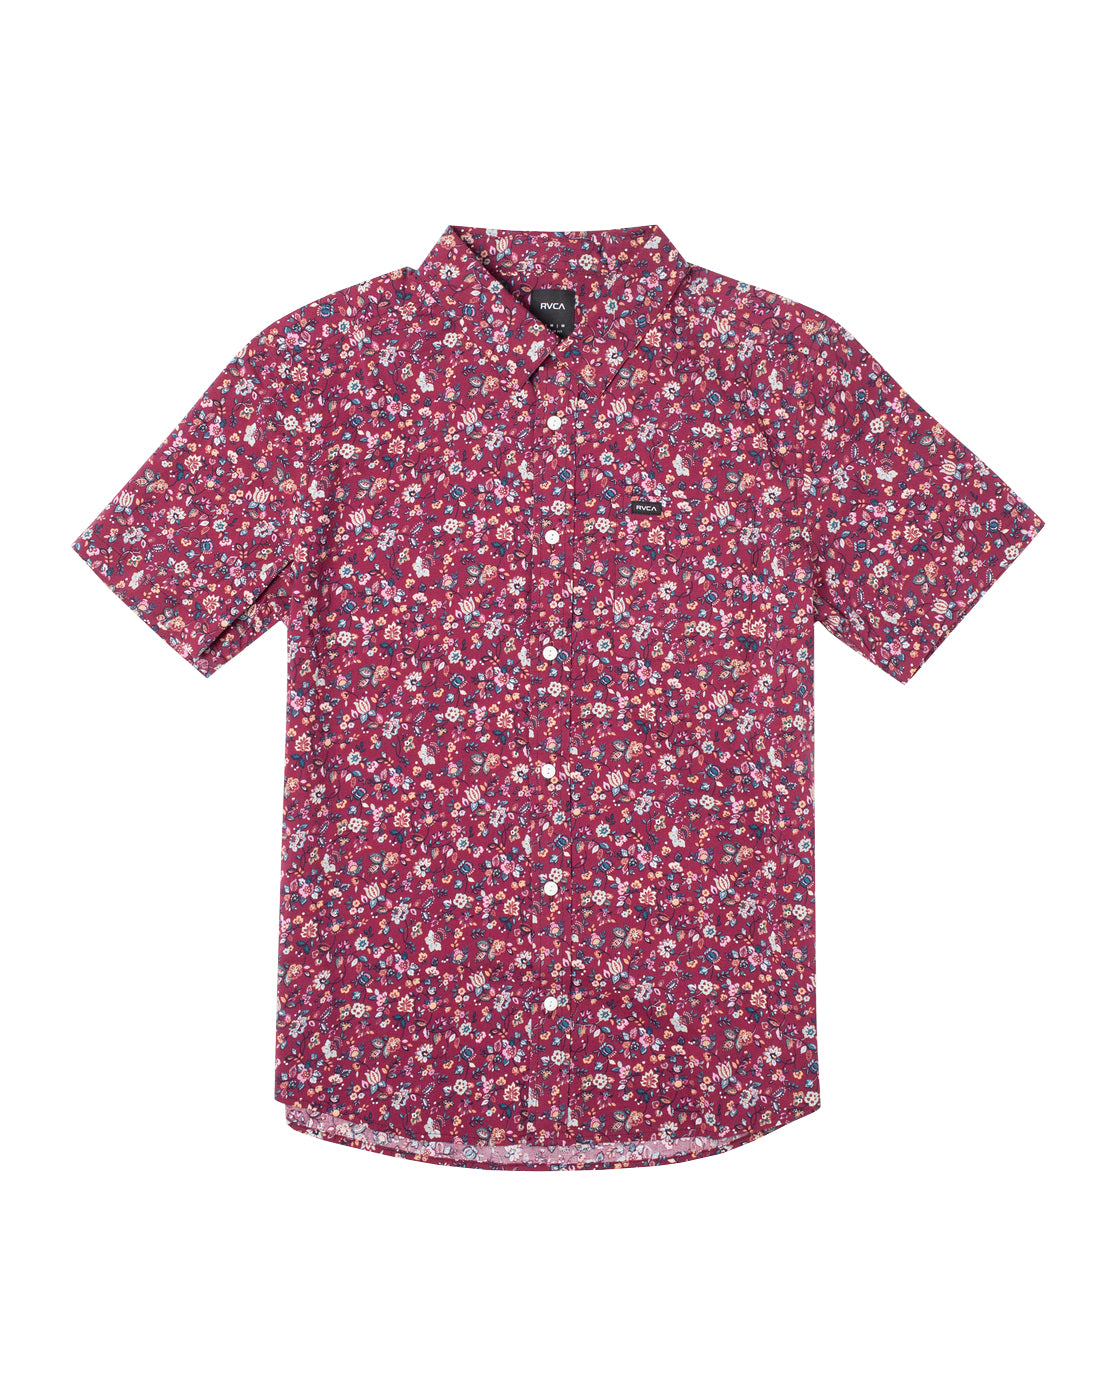 RVCA Justice Floral SS Woven Tee OXR M